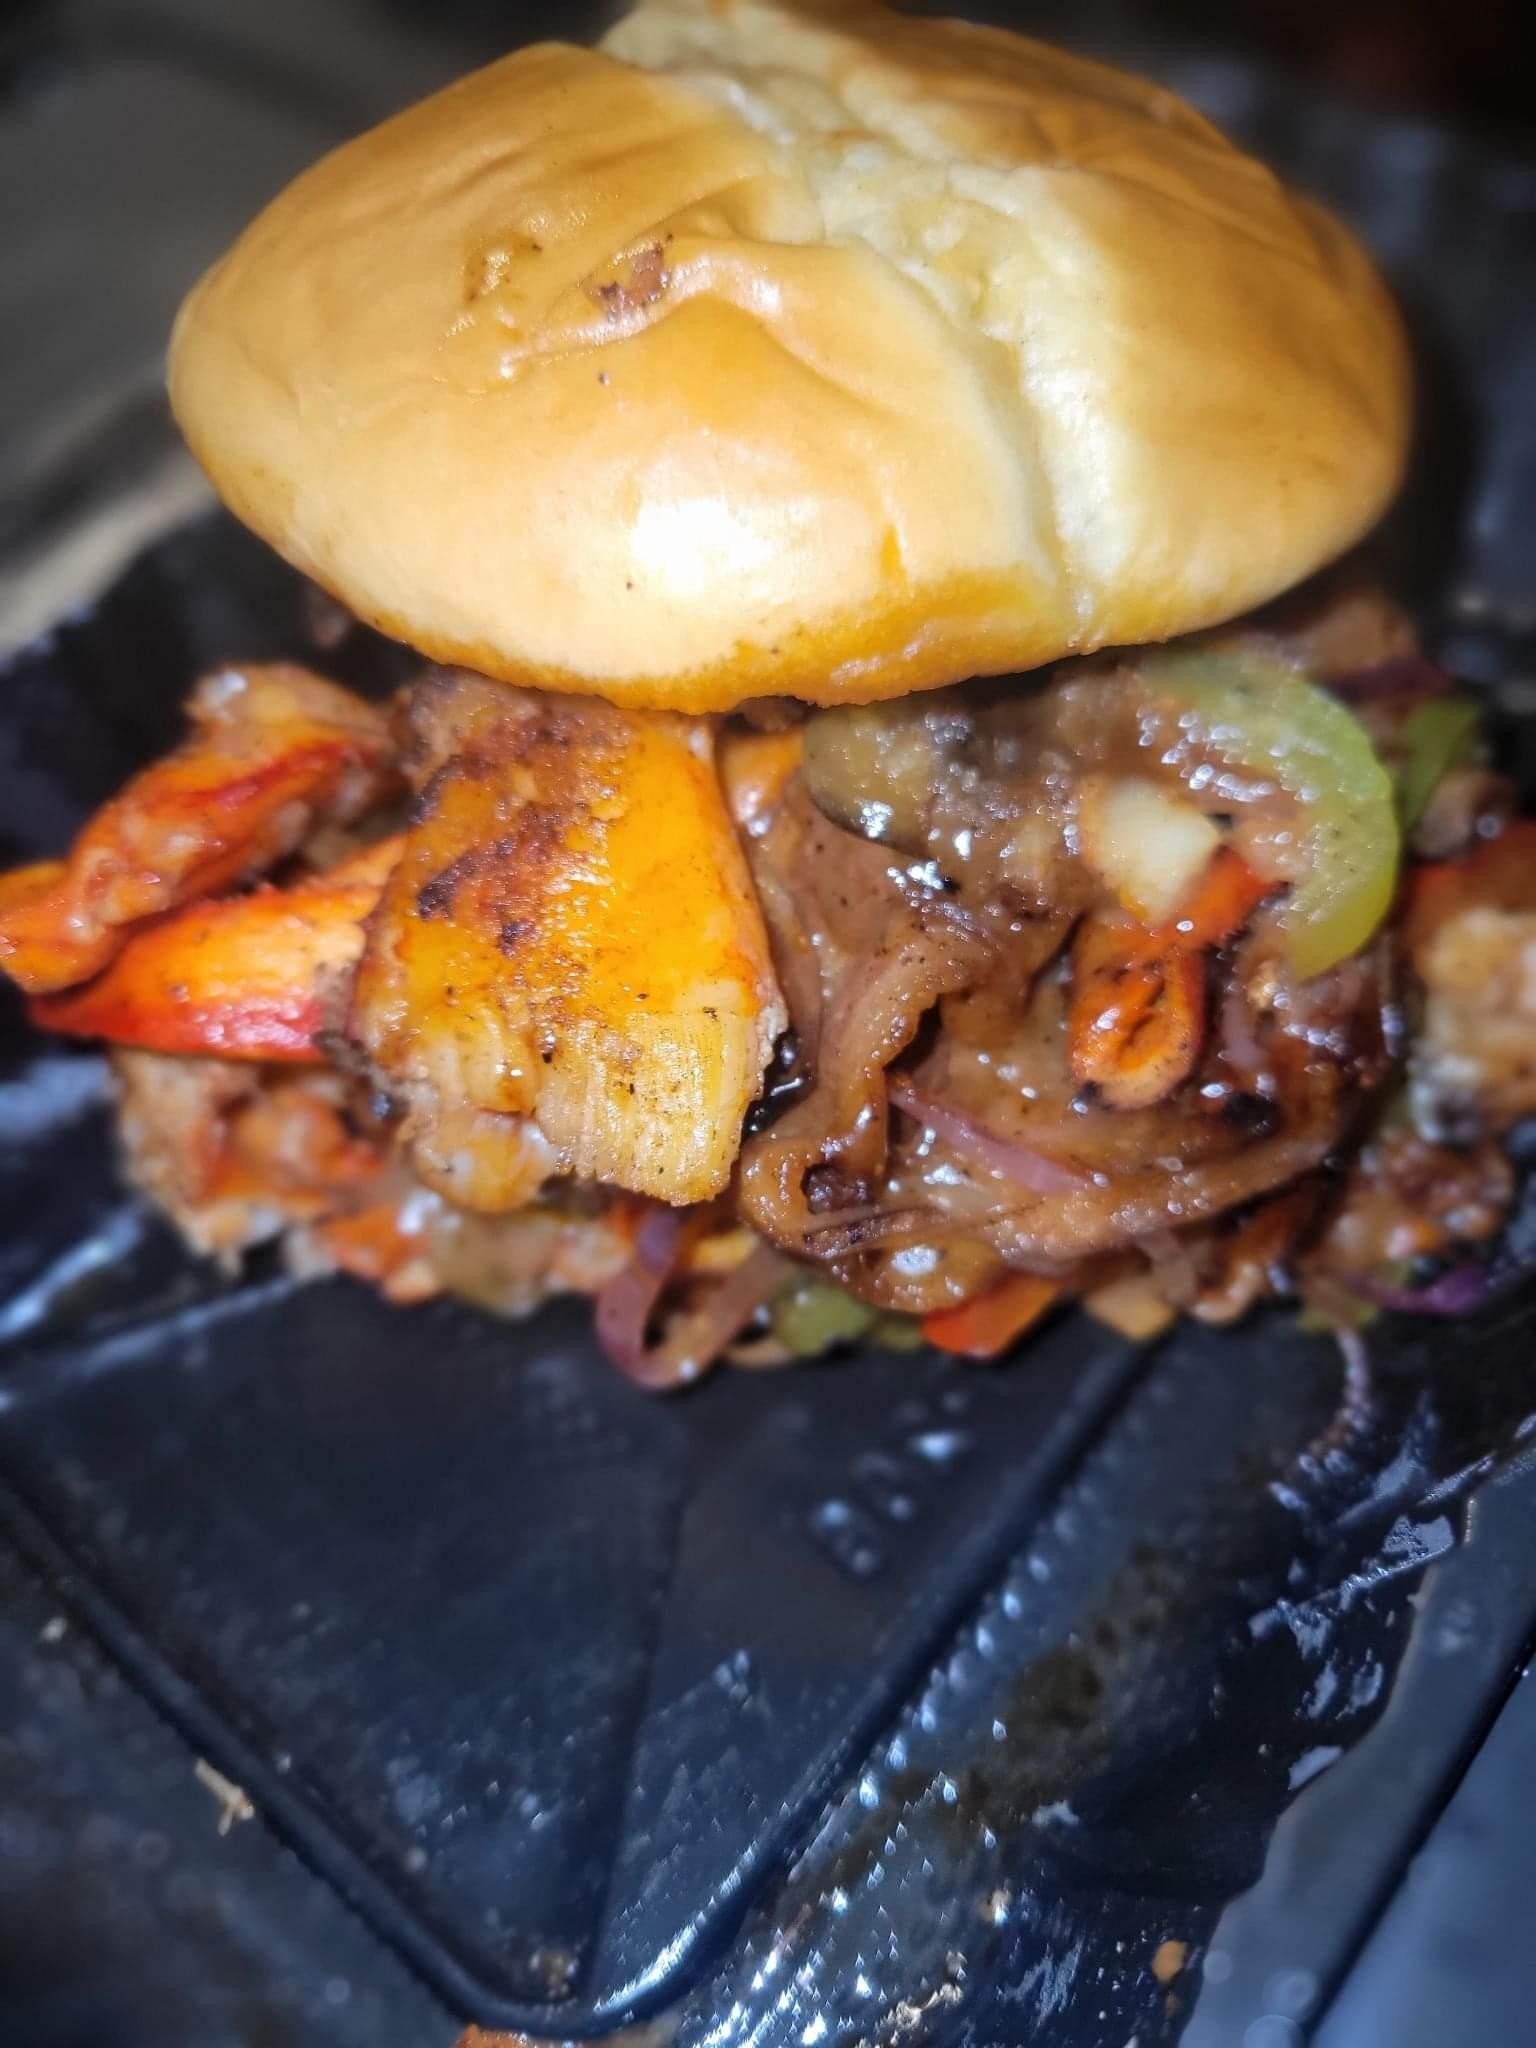 BBL BURGER (BEEF, BACON, LOBSTER)